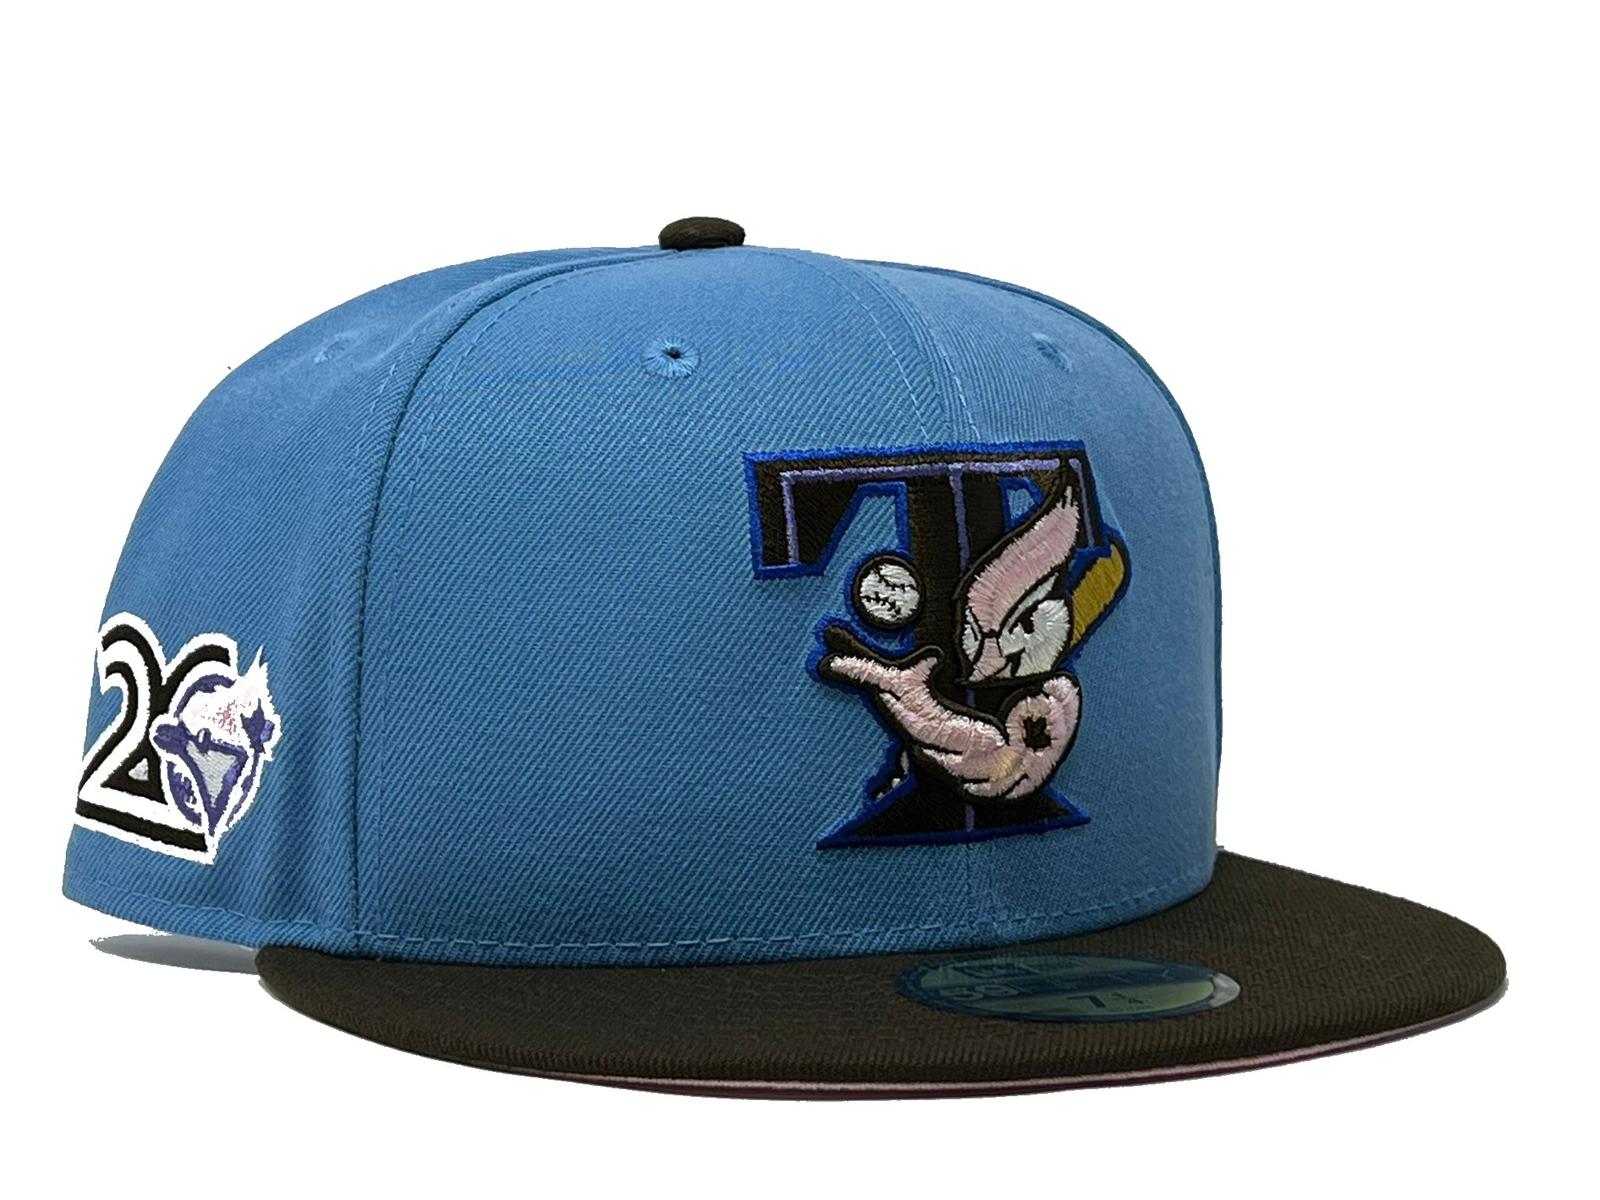 Toronto Blue Jays (Brown) Fitted – Cap World: Embroidery